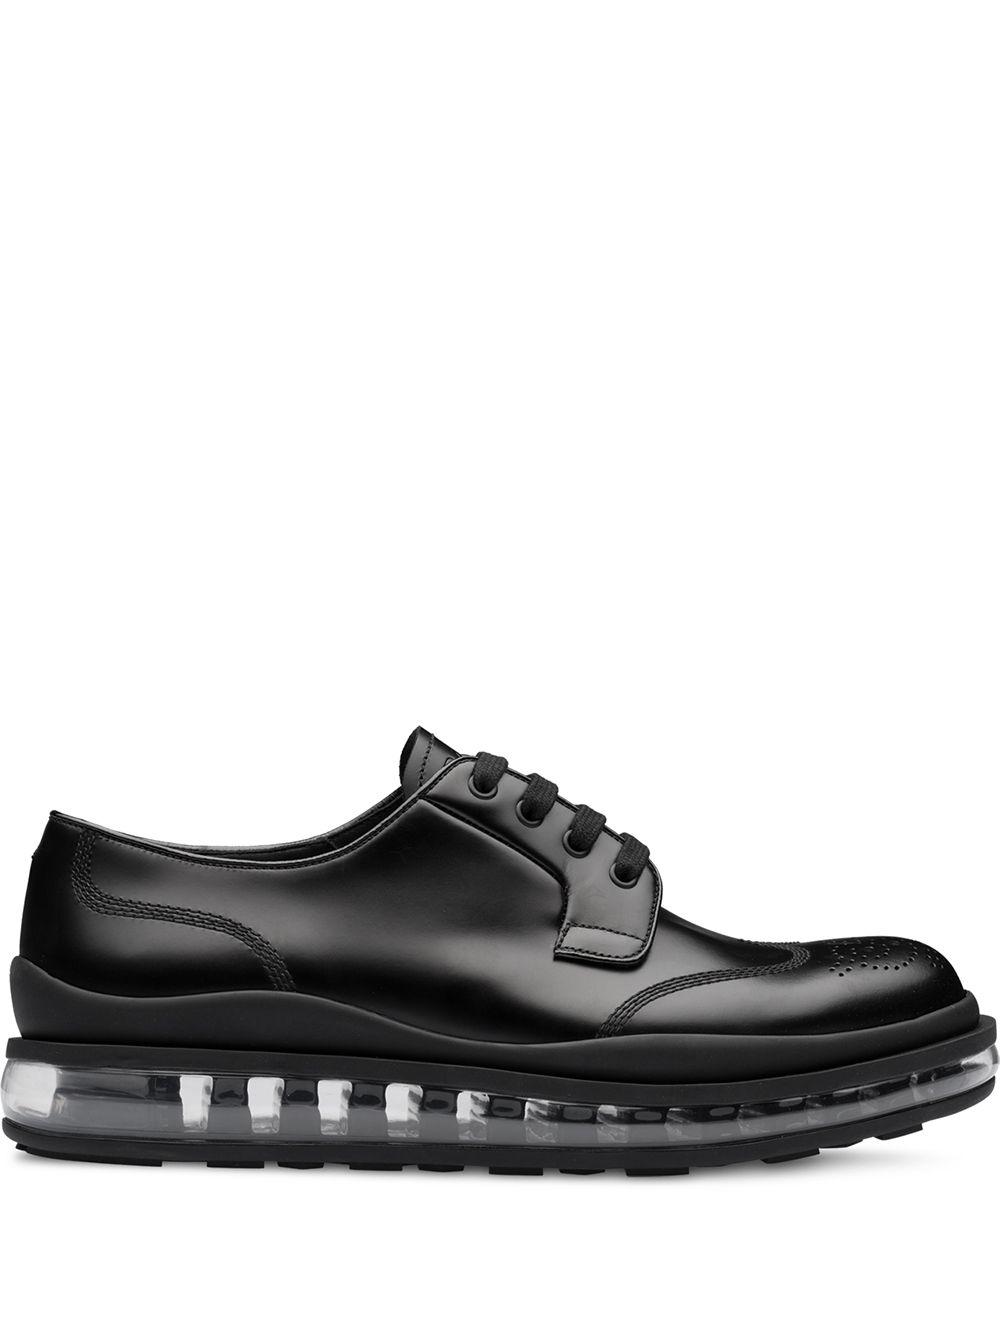 Prada Leather Brogue Detail Derby Shoes in Black for Men - Lyst